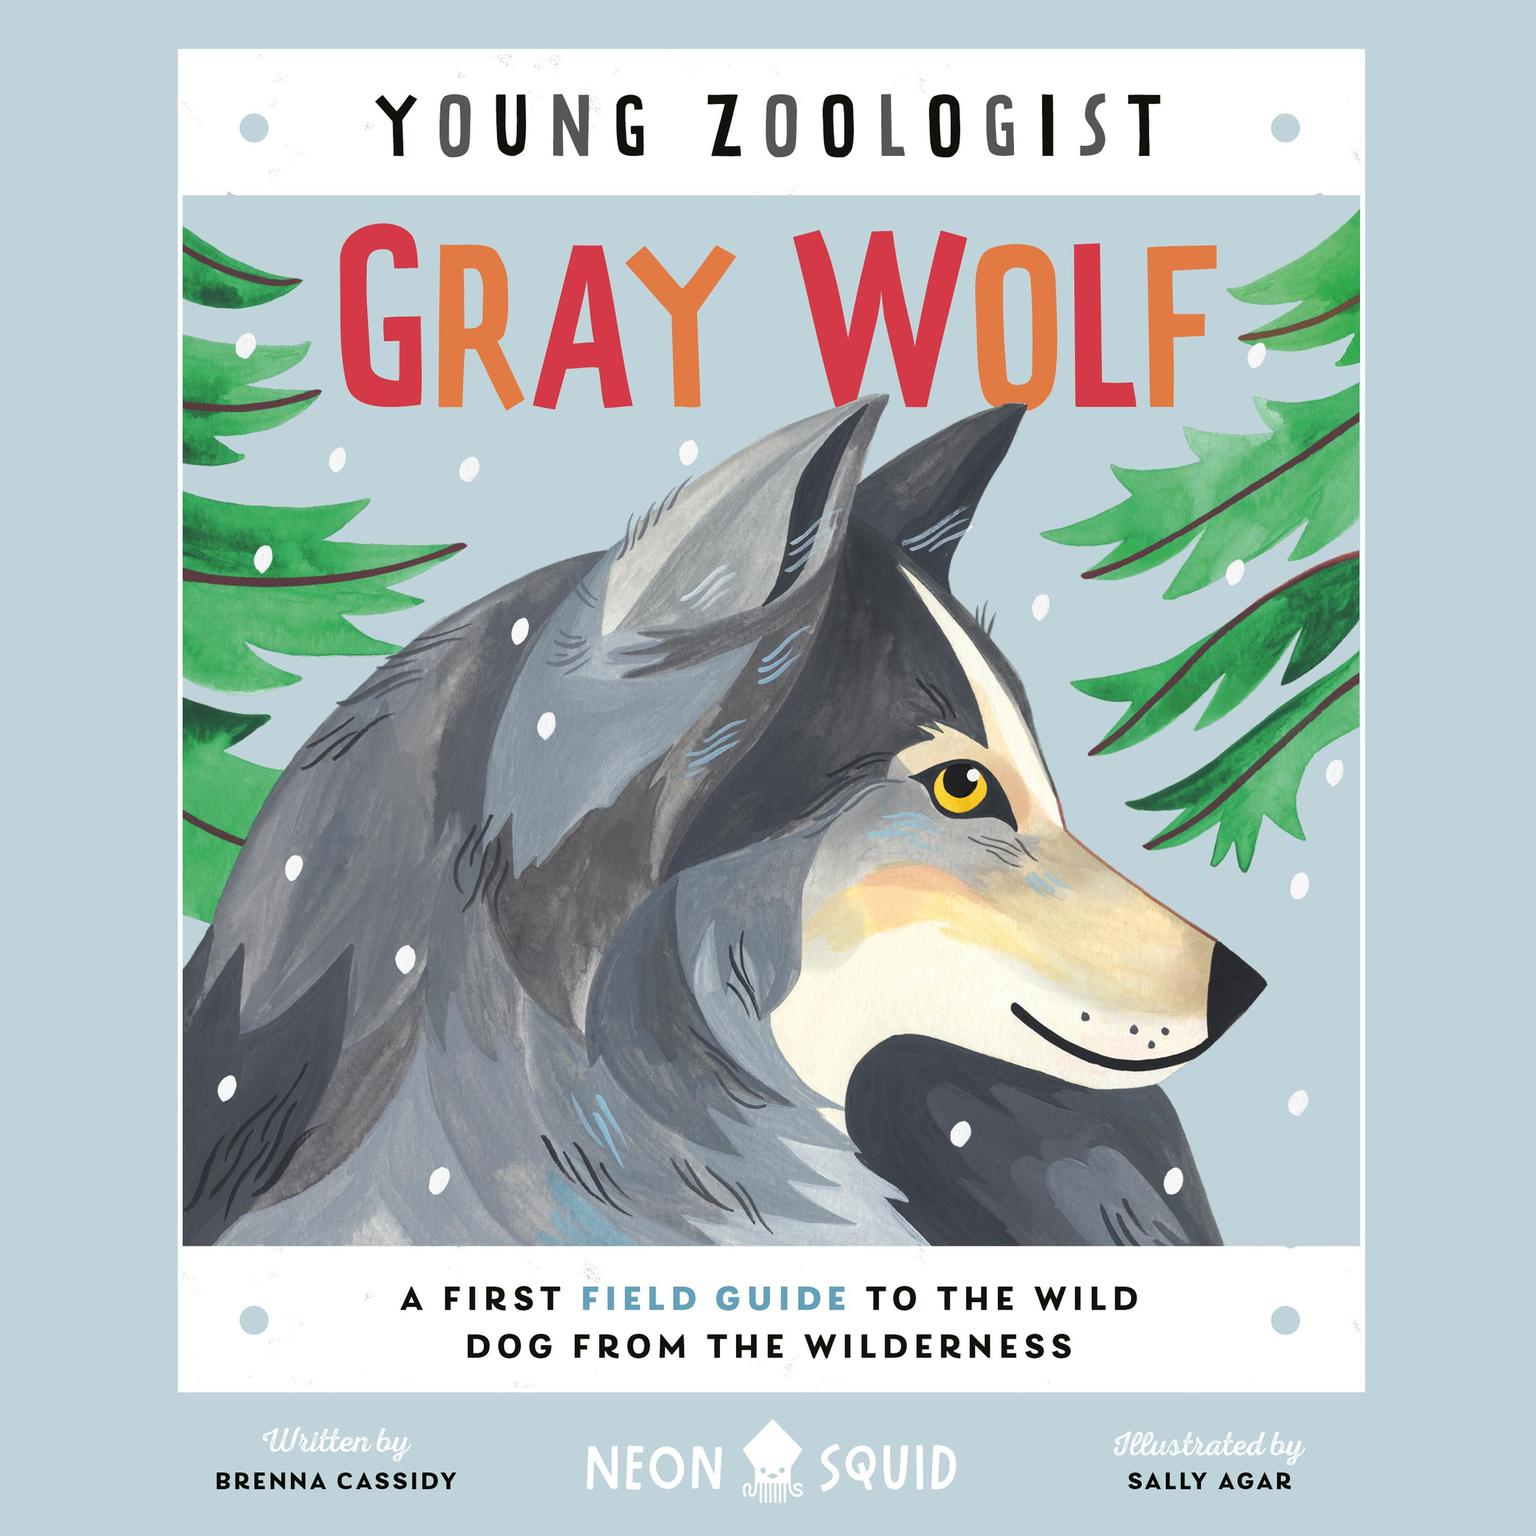 Gray Wolf (Young Zoologist): A First Field Guide to the Wild Dog from the Wilderness Audiobook, by Brenna Cassidy